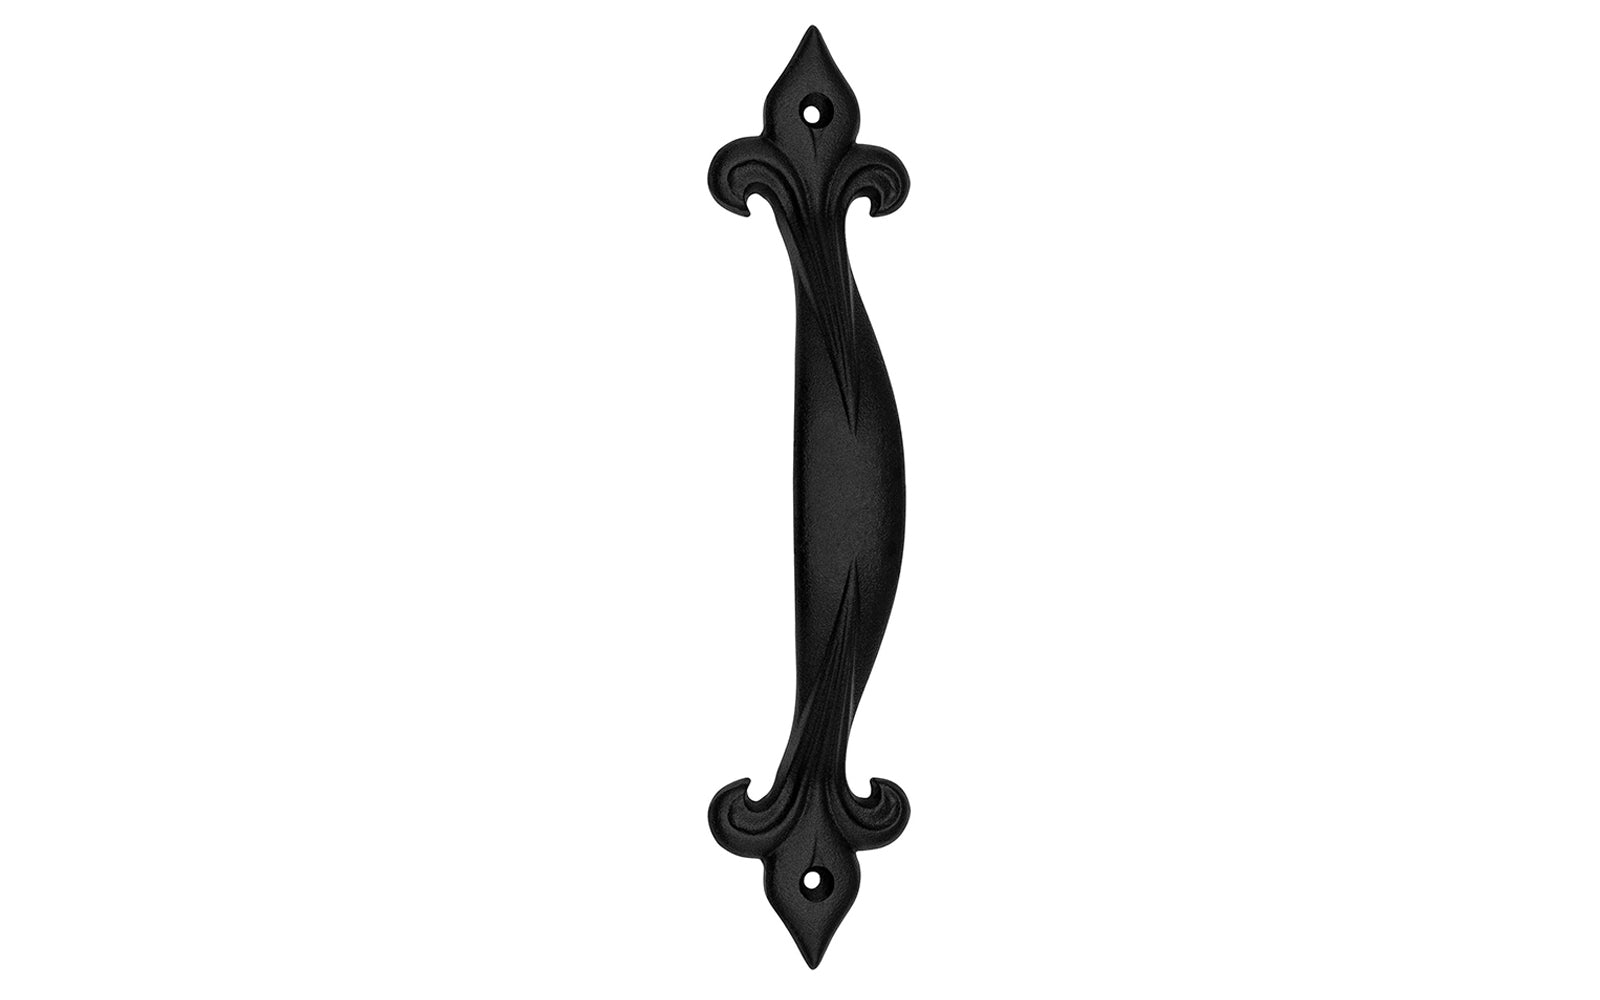 A rustic-looking "Fleur-de-Lis" door pull. Made of strong cast iron material, it has a nice durable & strong feel. This traditional & ornate piece of hardware is great for doors, gates, & large drawers. Powder coated to resist rust. Model 88494 - Floral Ornate Cast Iron Gate Pull - Cast Iron Fleur de Lis Handle Pull